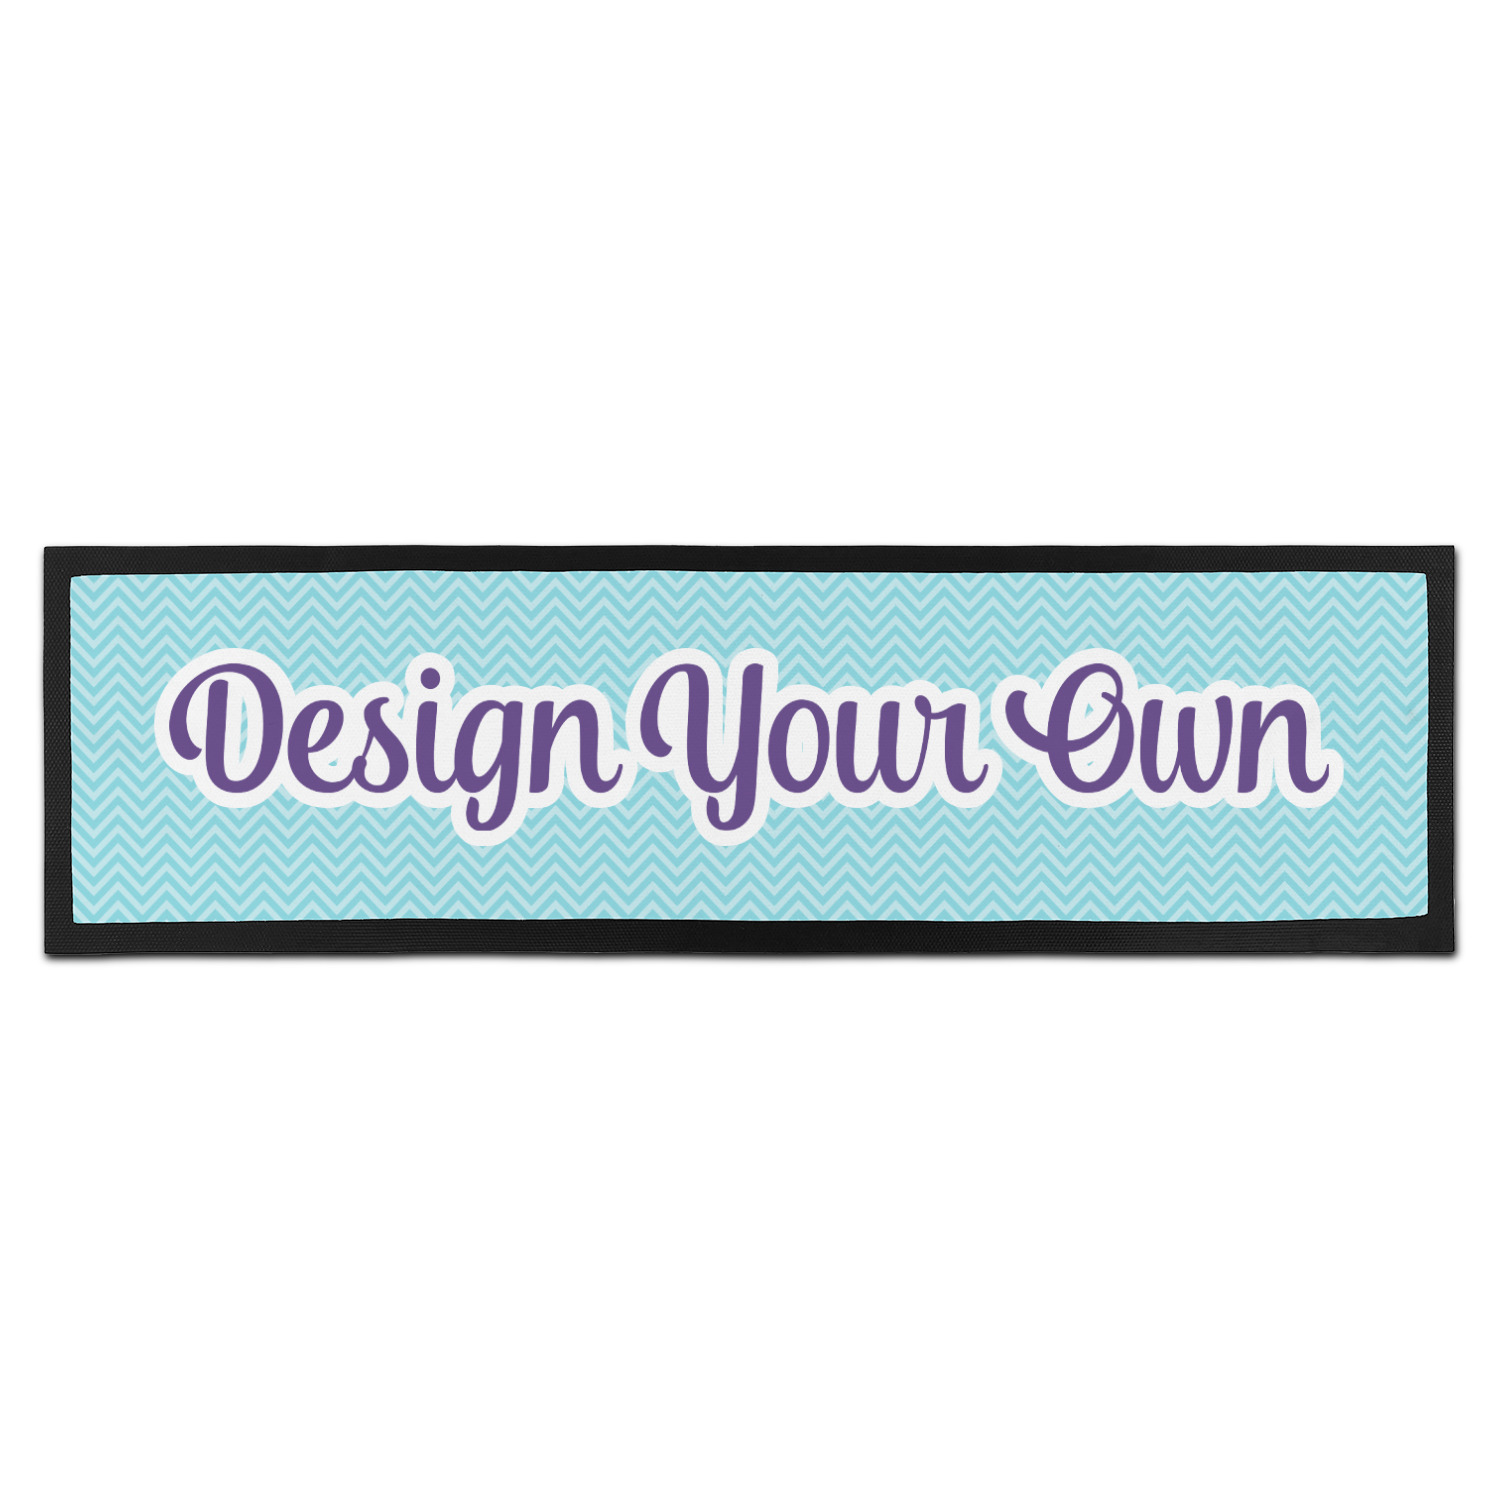 https://www.youcustomizeit.com/common/MAKE/965833/Design-Your-Own-Bar-Mat-Large-FRONT.jpg?lm=1625607096